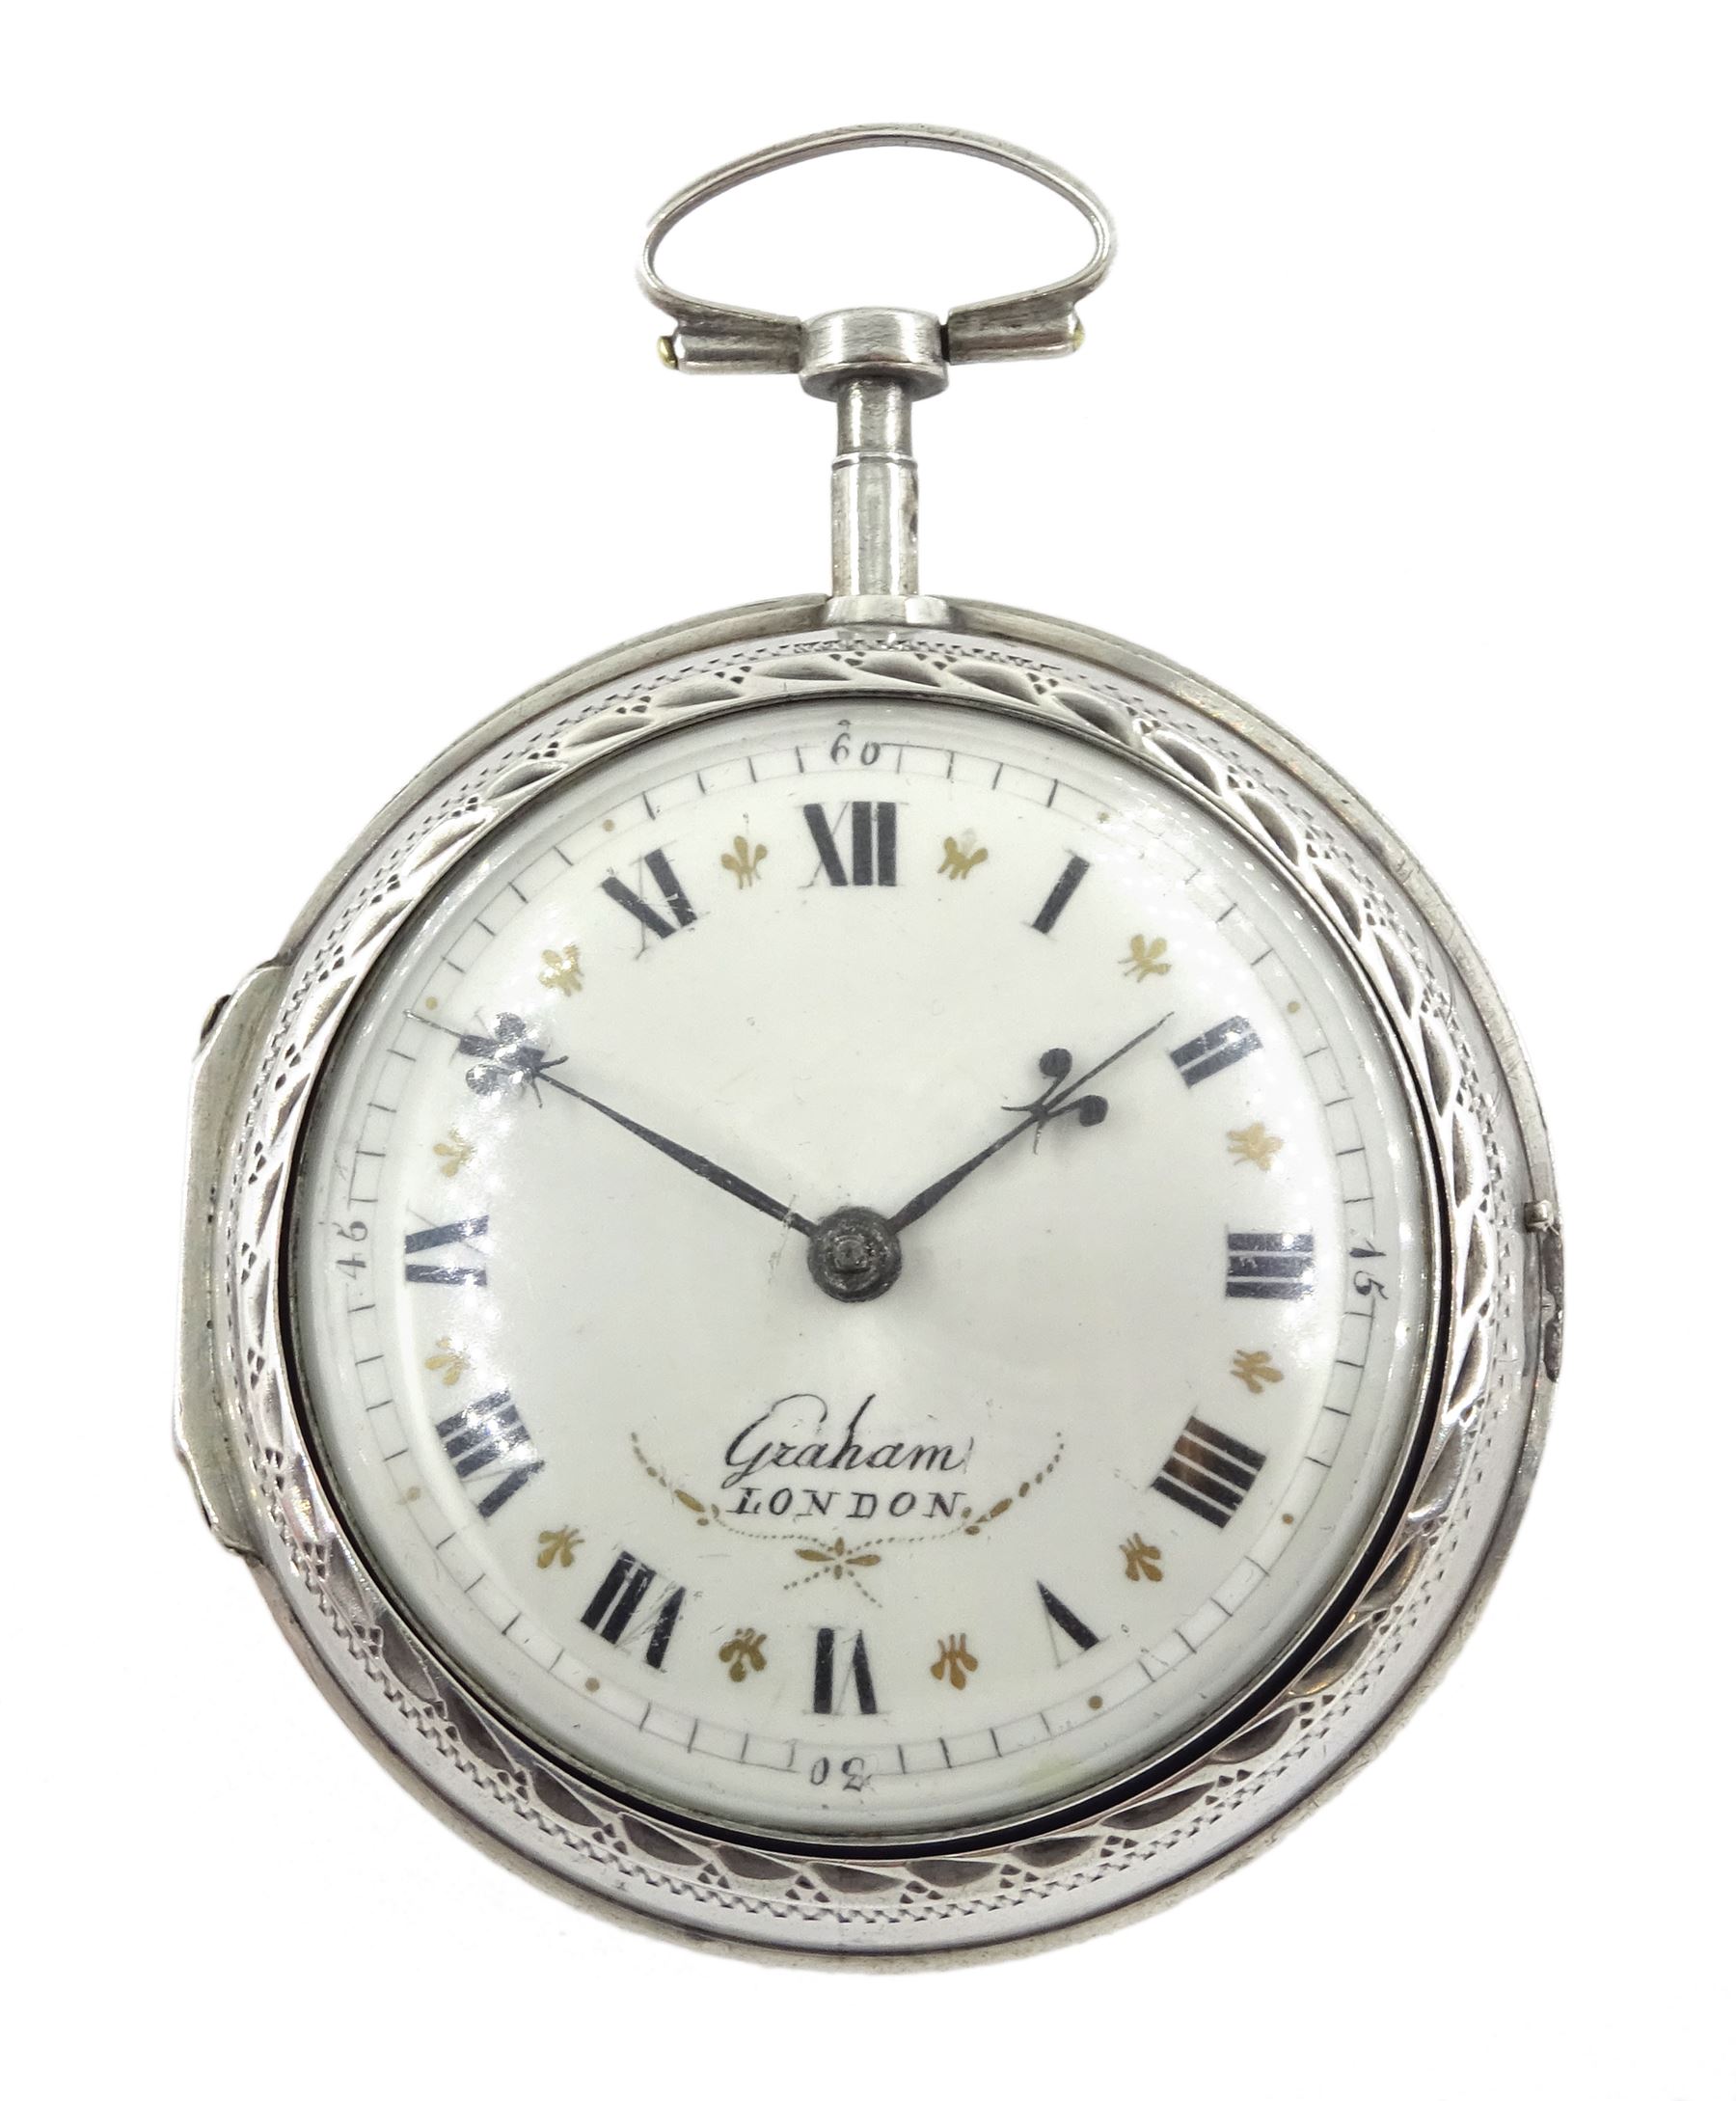 18th century silver and tortoiseshell quadruple cased verge fusee pocket watch by Graham, London, sq - Image 11 of 14